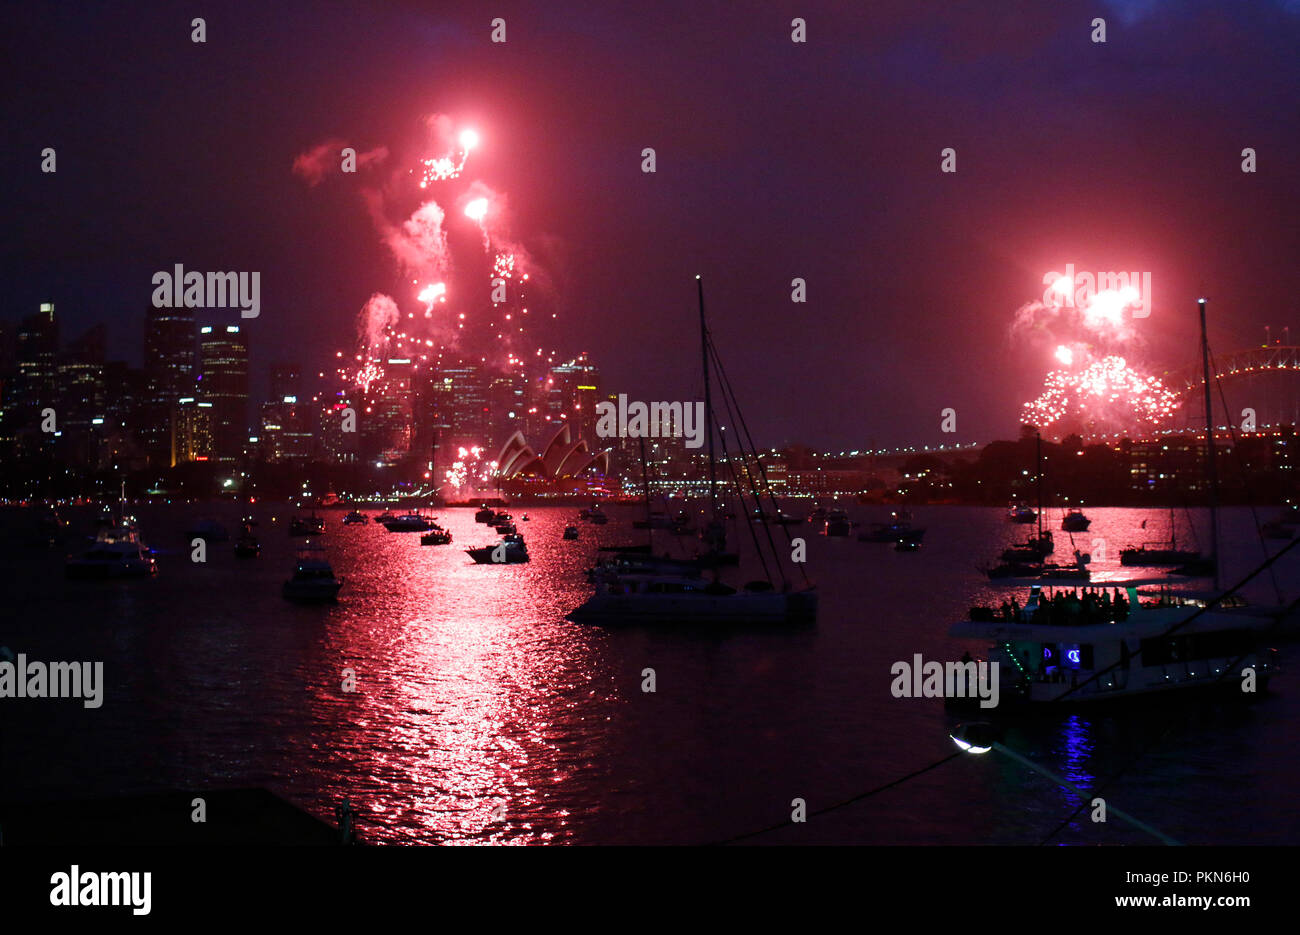 New Years Eve fireworks in Sydney: 8 tons of fireworks set the sky on fire at Sydney harbour with the Opera House and the Harbour Bridge, Sydney, Aust Stock Photo